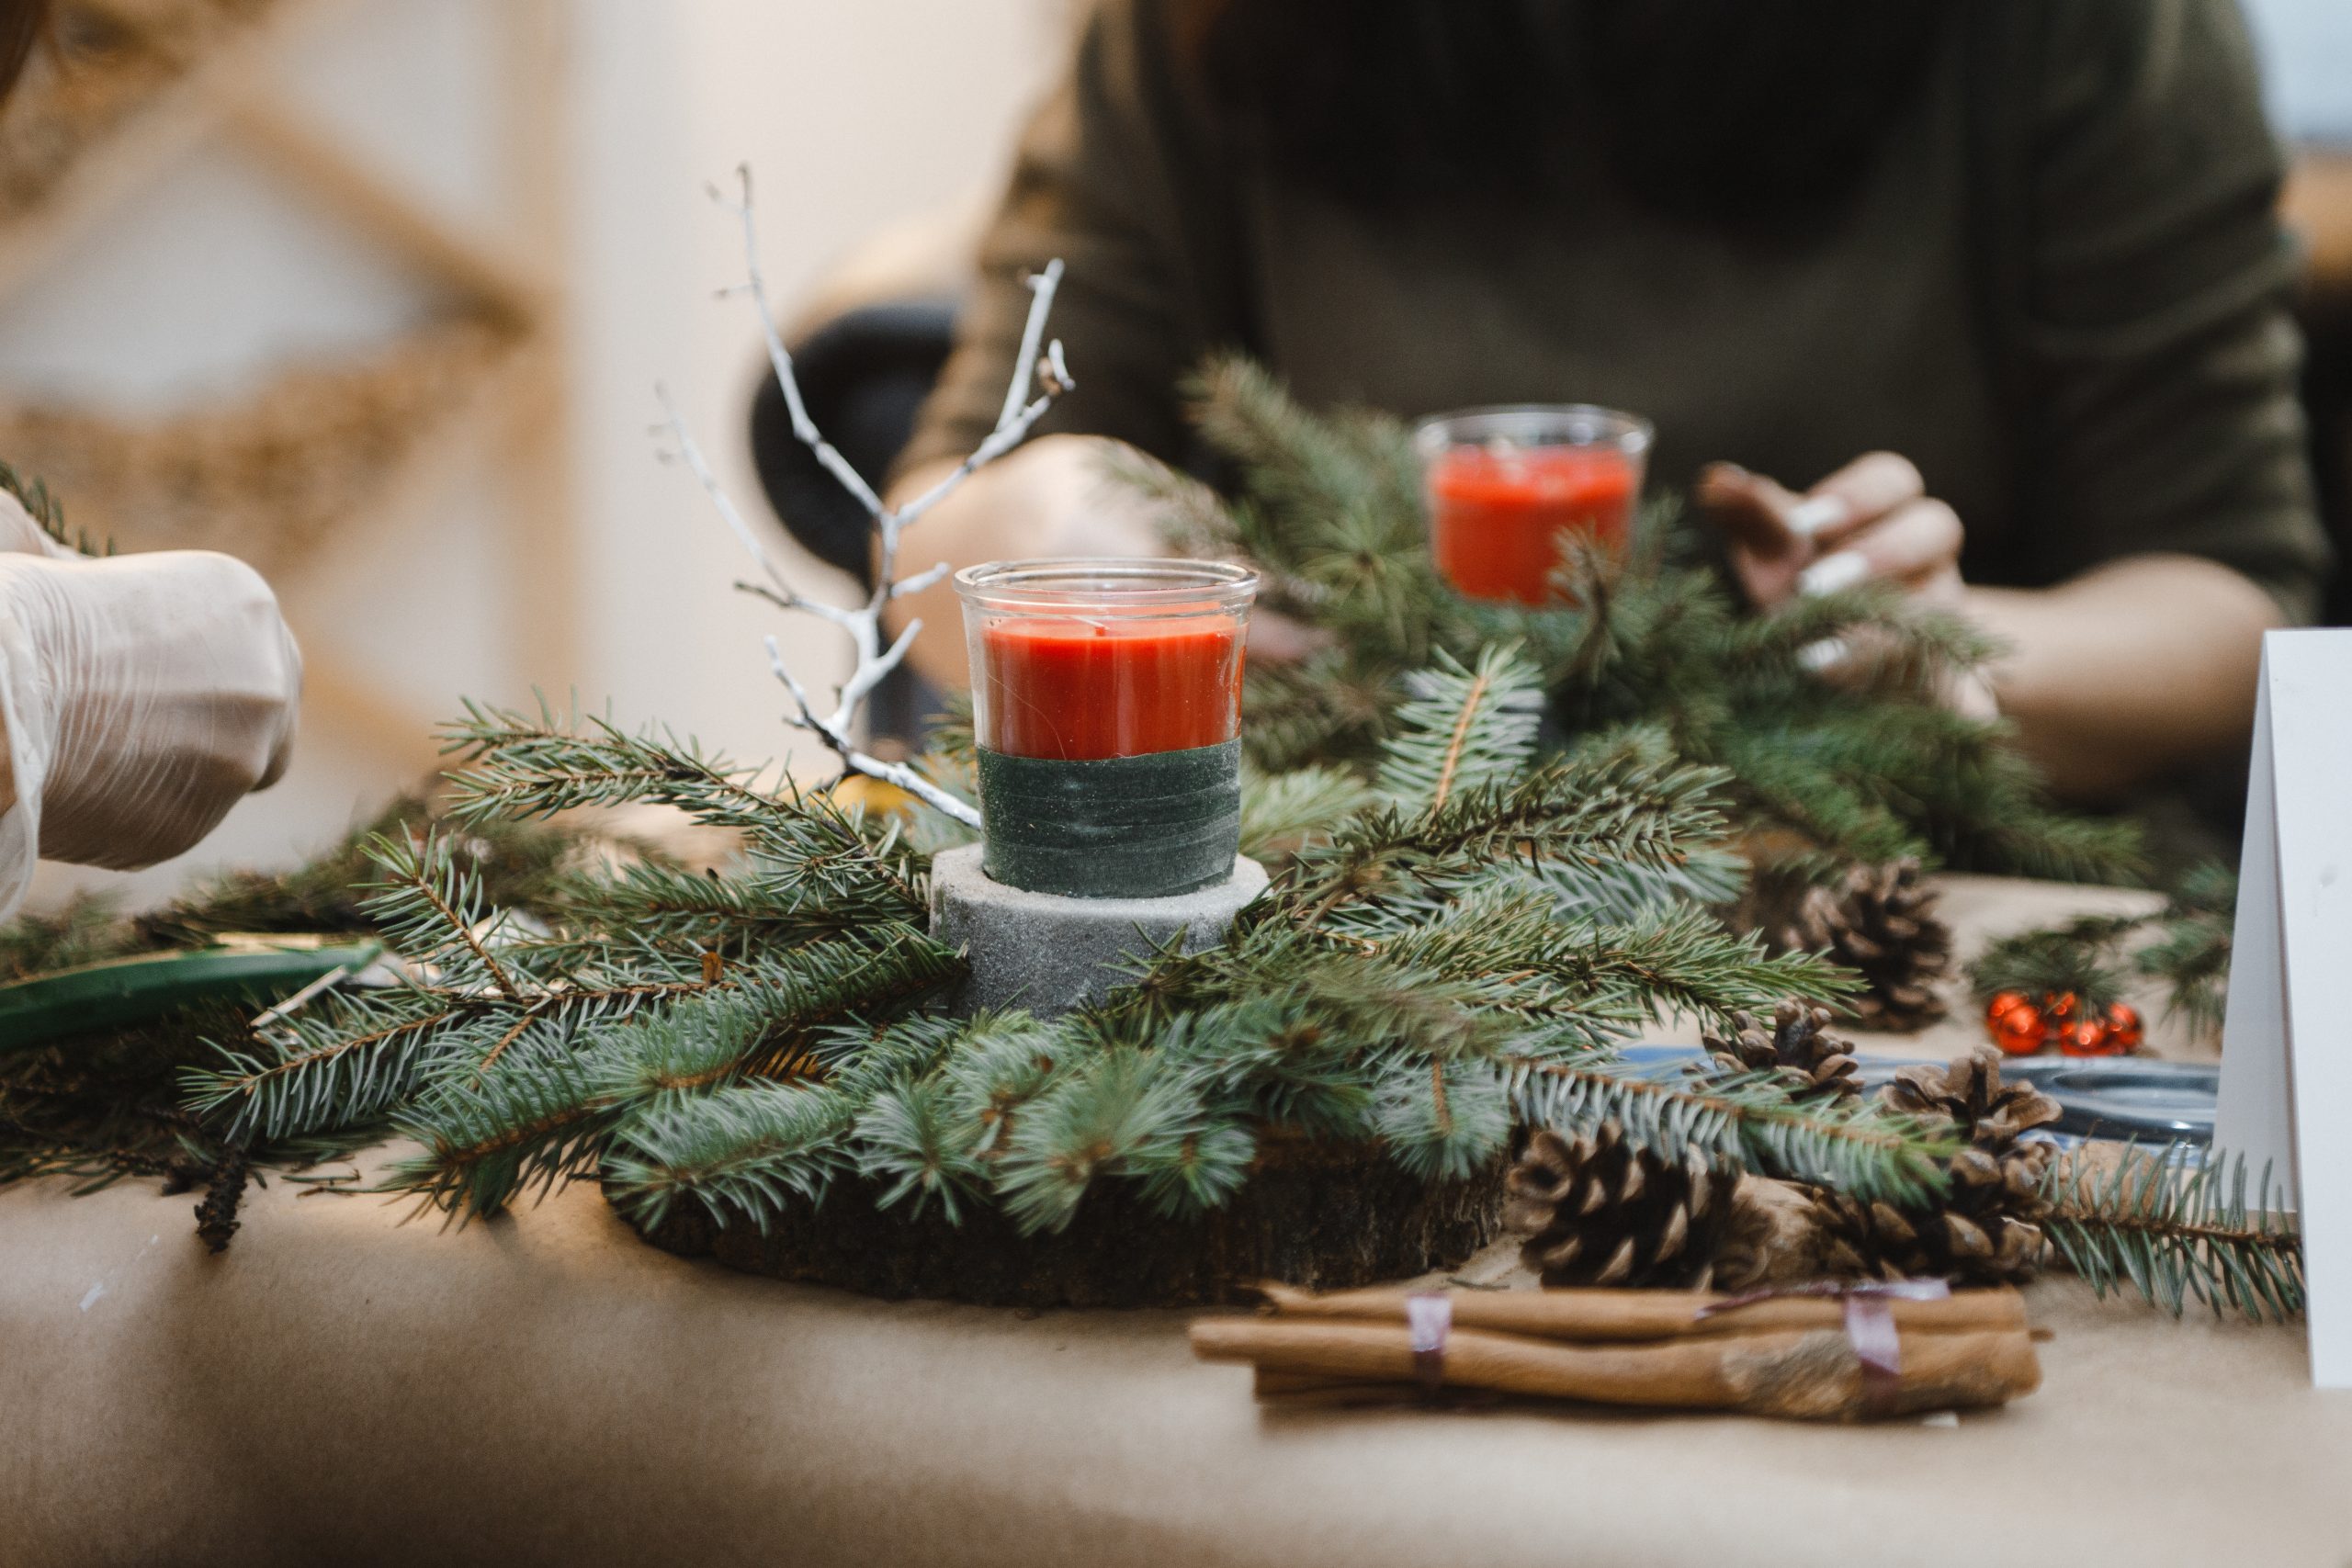 Home-made Christmas candle holders decorated with pine branches.